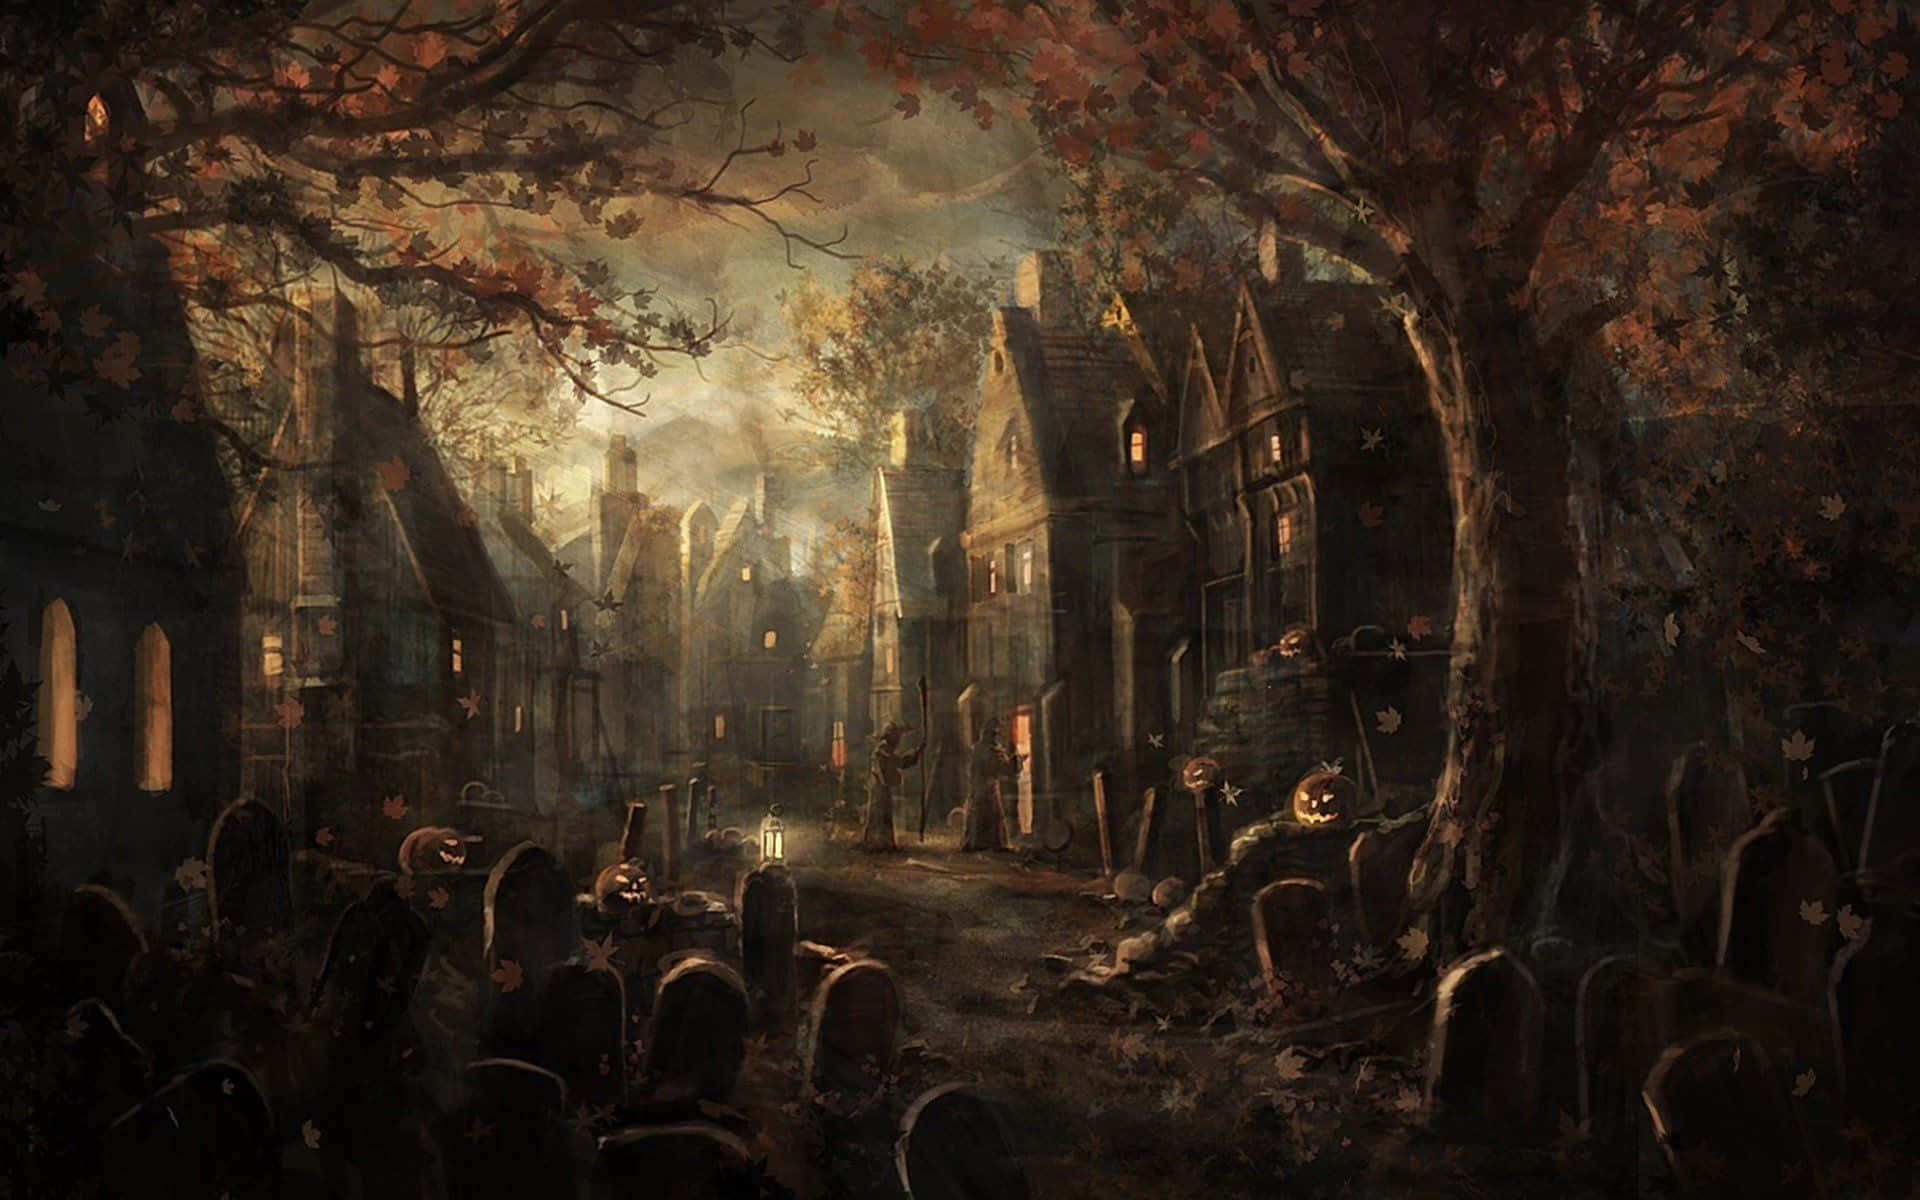 "Surrounded by spooky headstones, the little girl in a witch costume looks deep into the darkness of this Halloween graveyard." Wallpaper